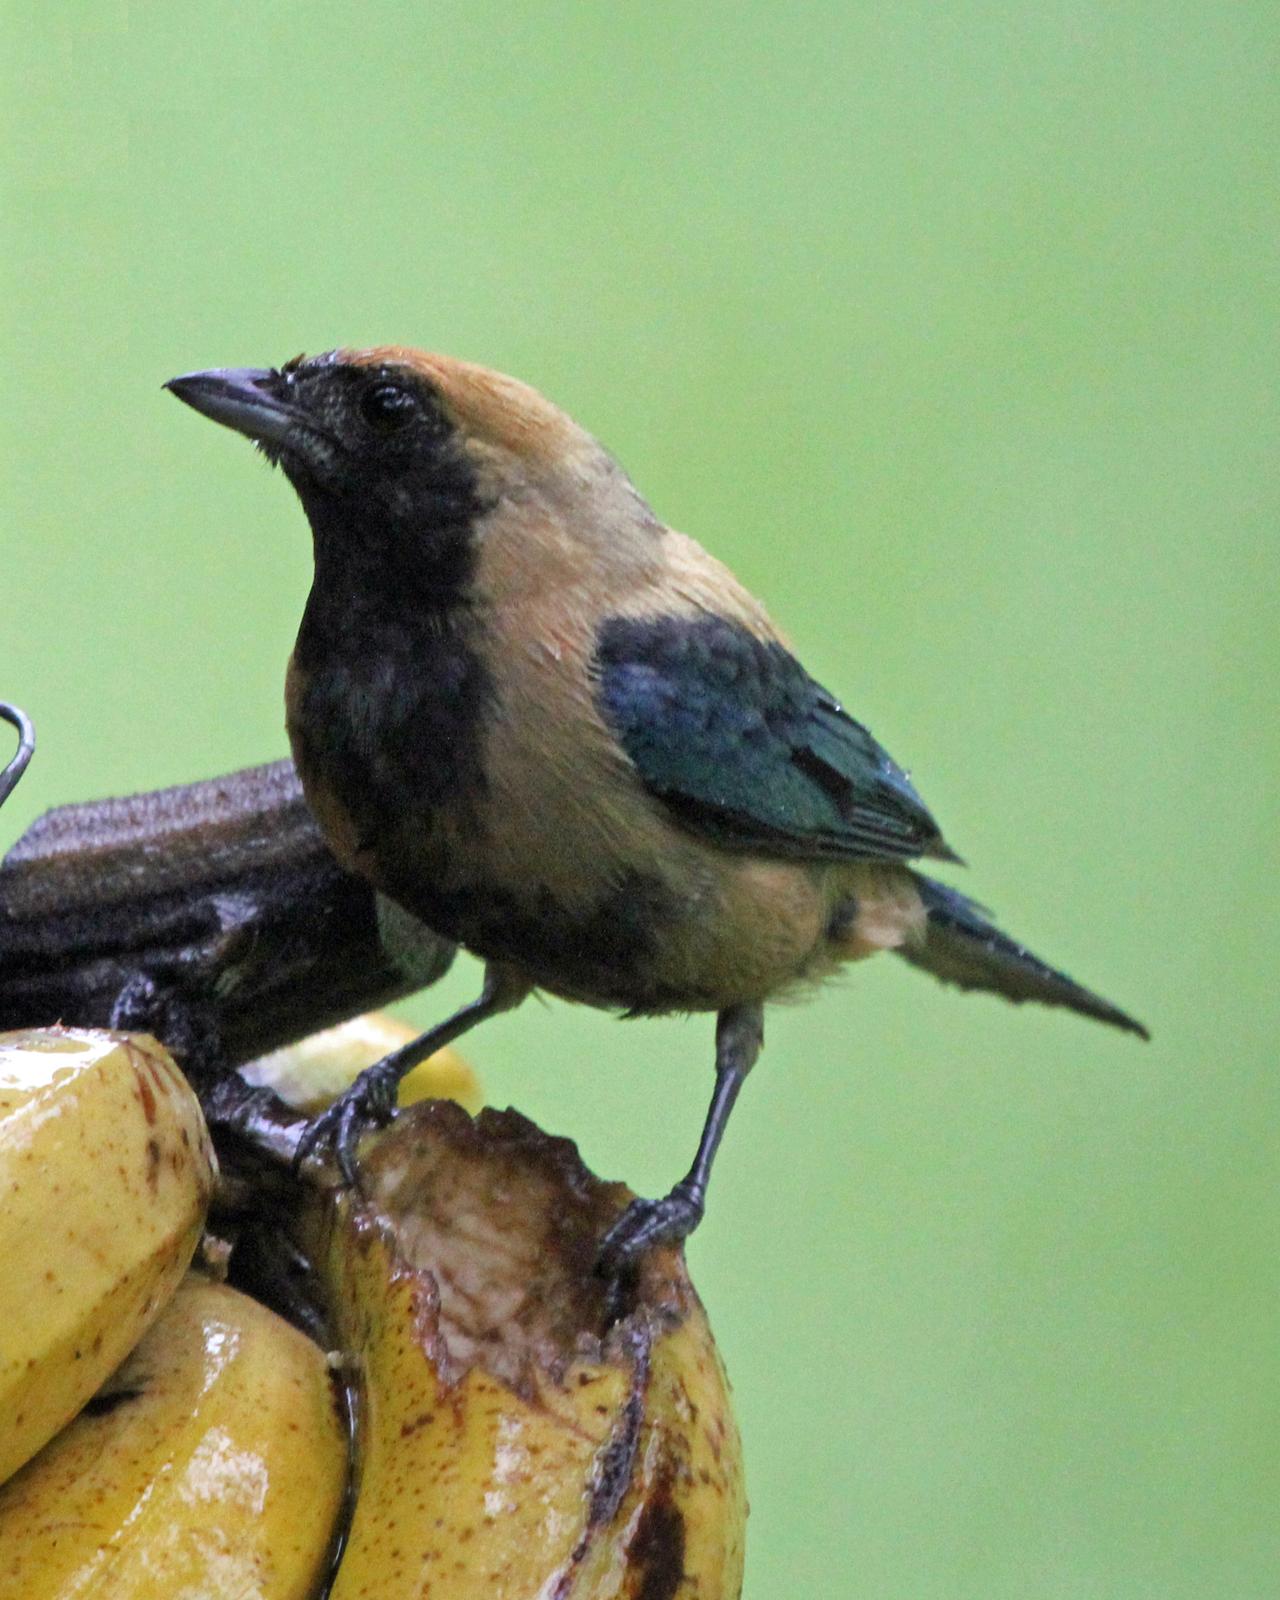 Burnished-buff Tanager Photo by Robert Polkinghorn